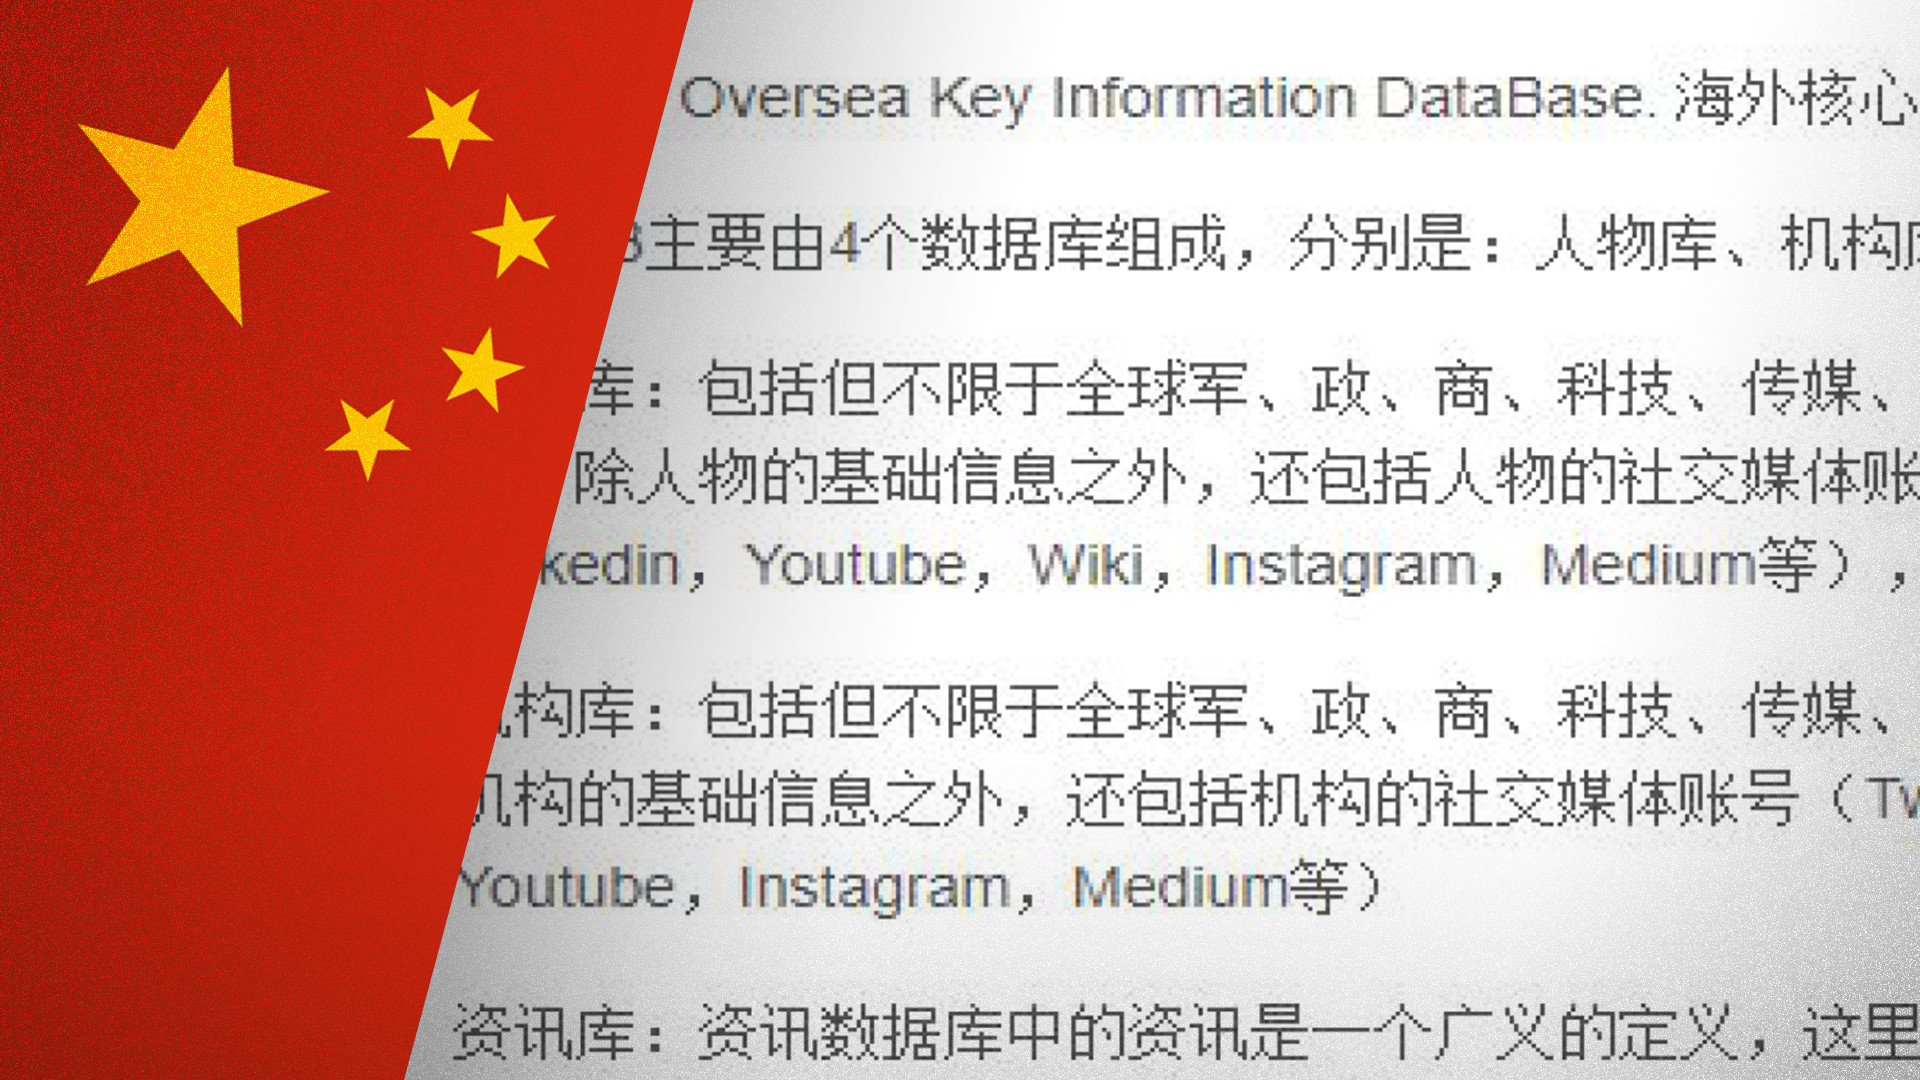 Yle believes that the Chinese Watch List, which contains 799 Finnish names, was copied from a U.S. database